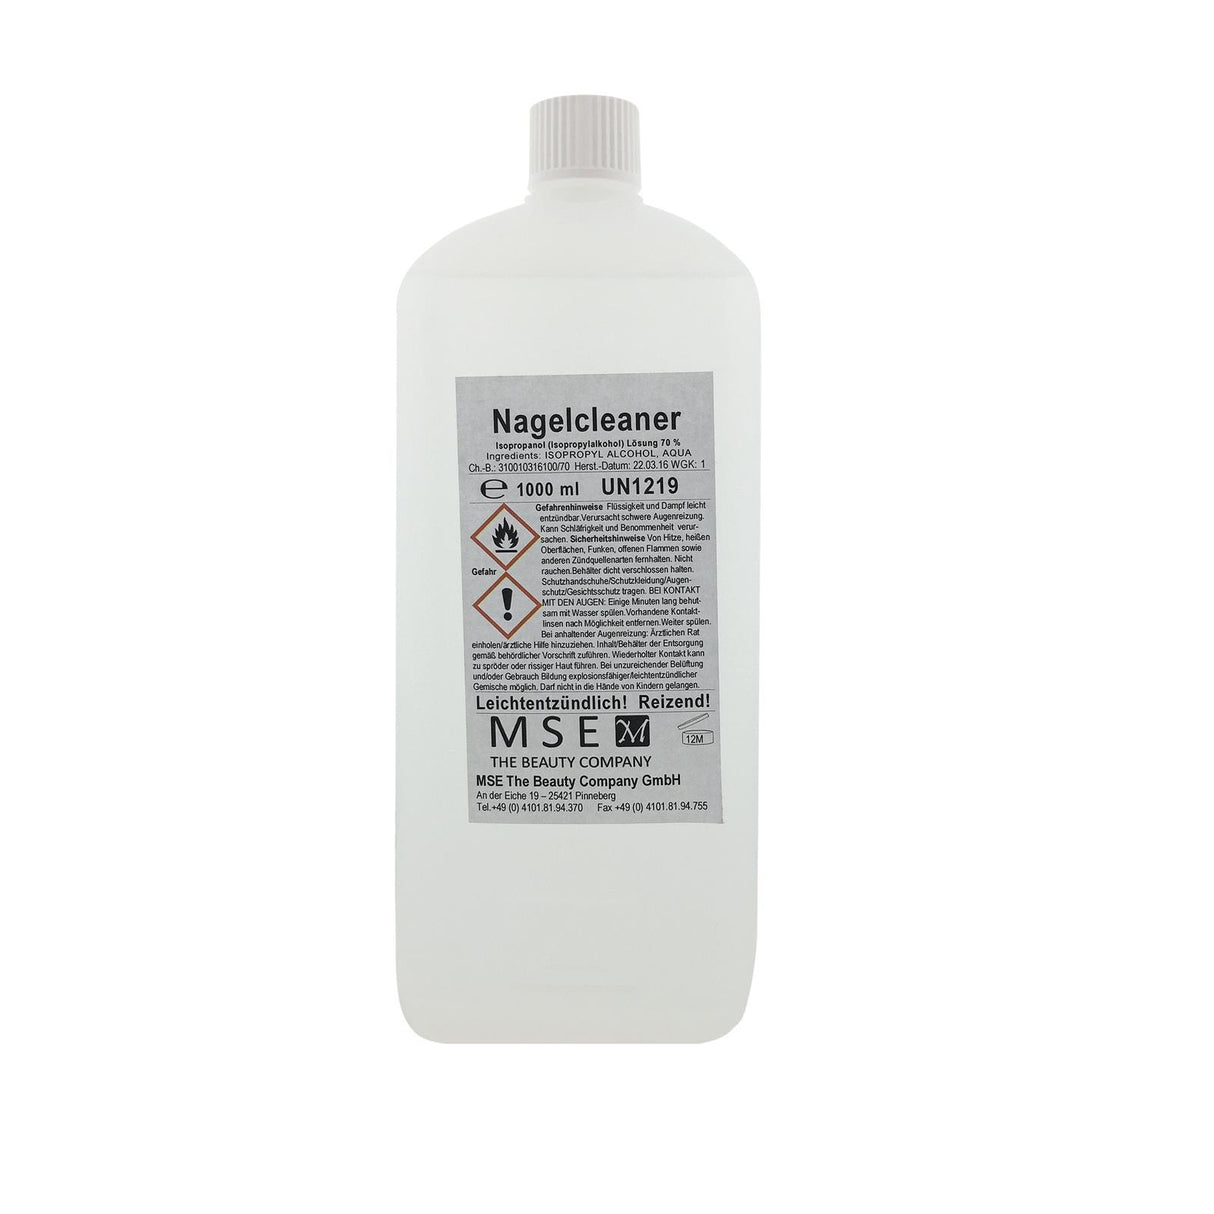 Nagelcleaner / UV Cleaner 1000ml - MSE - The Beauty Company